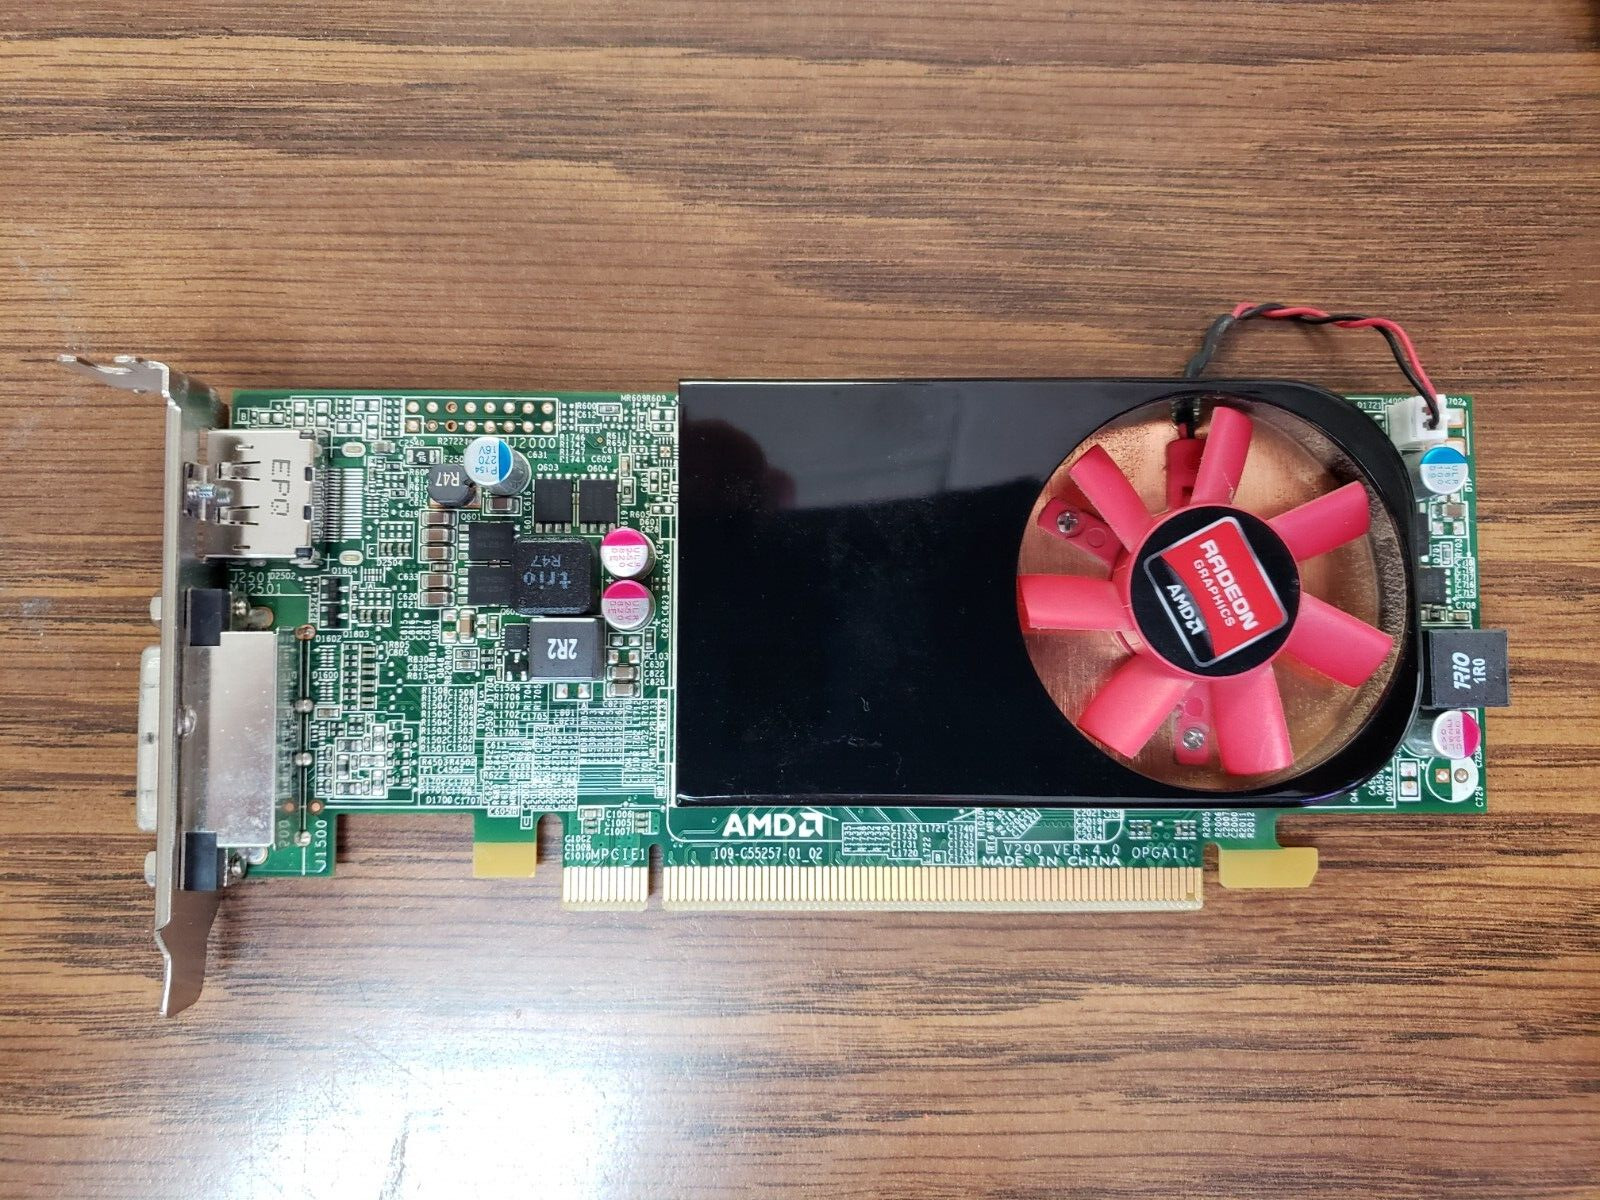 AMD R7 250 2gb graphics card DeLL OEM Low Profile